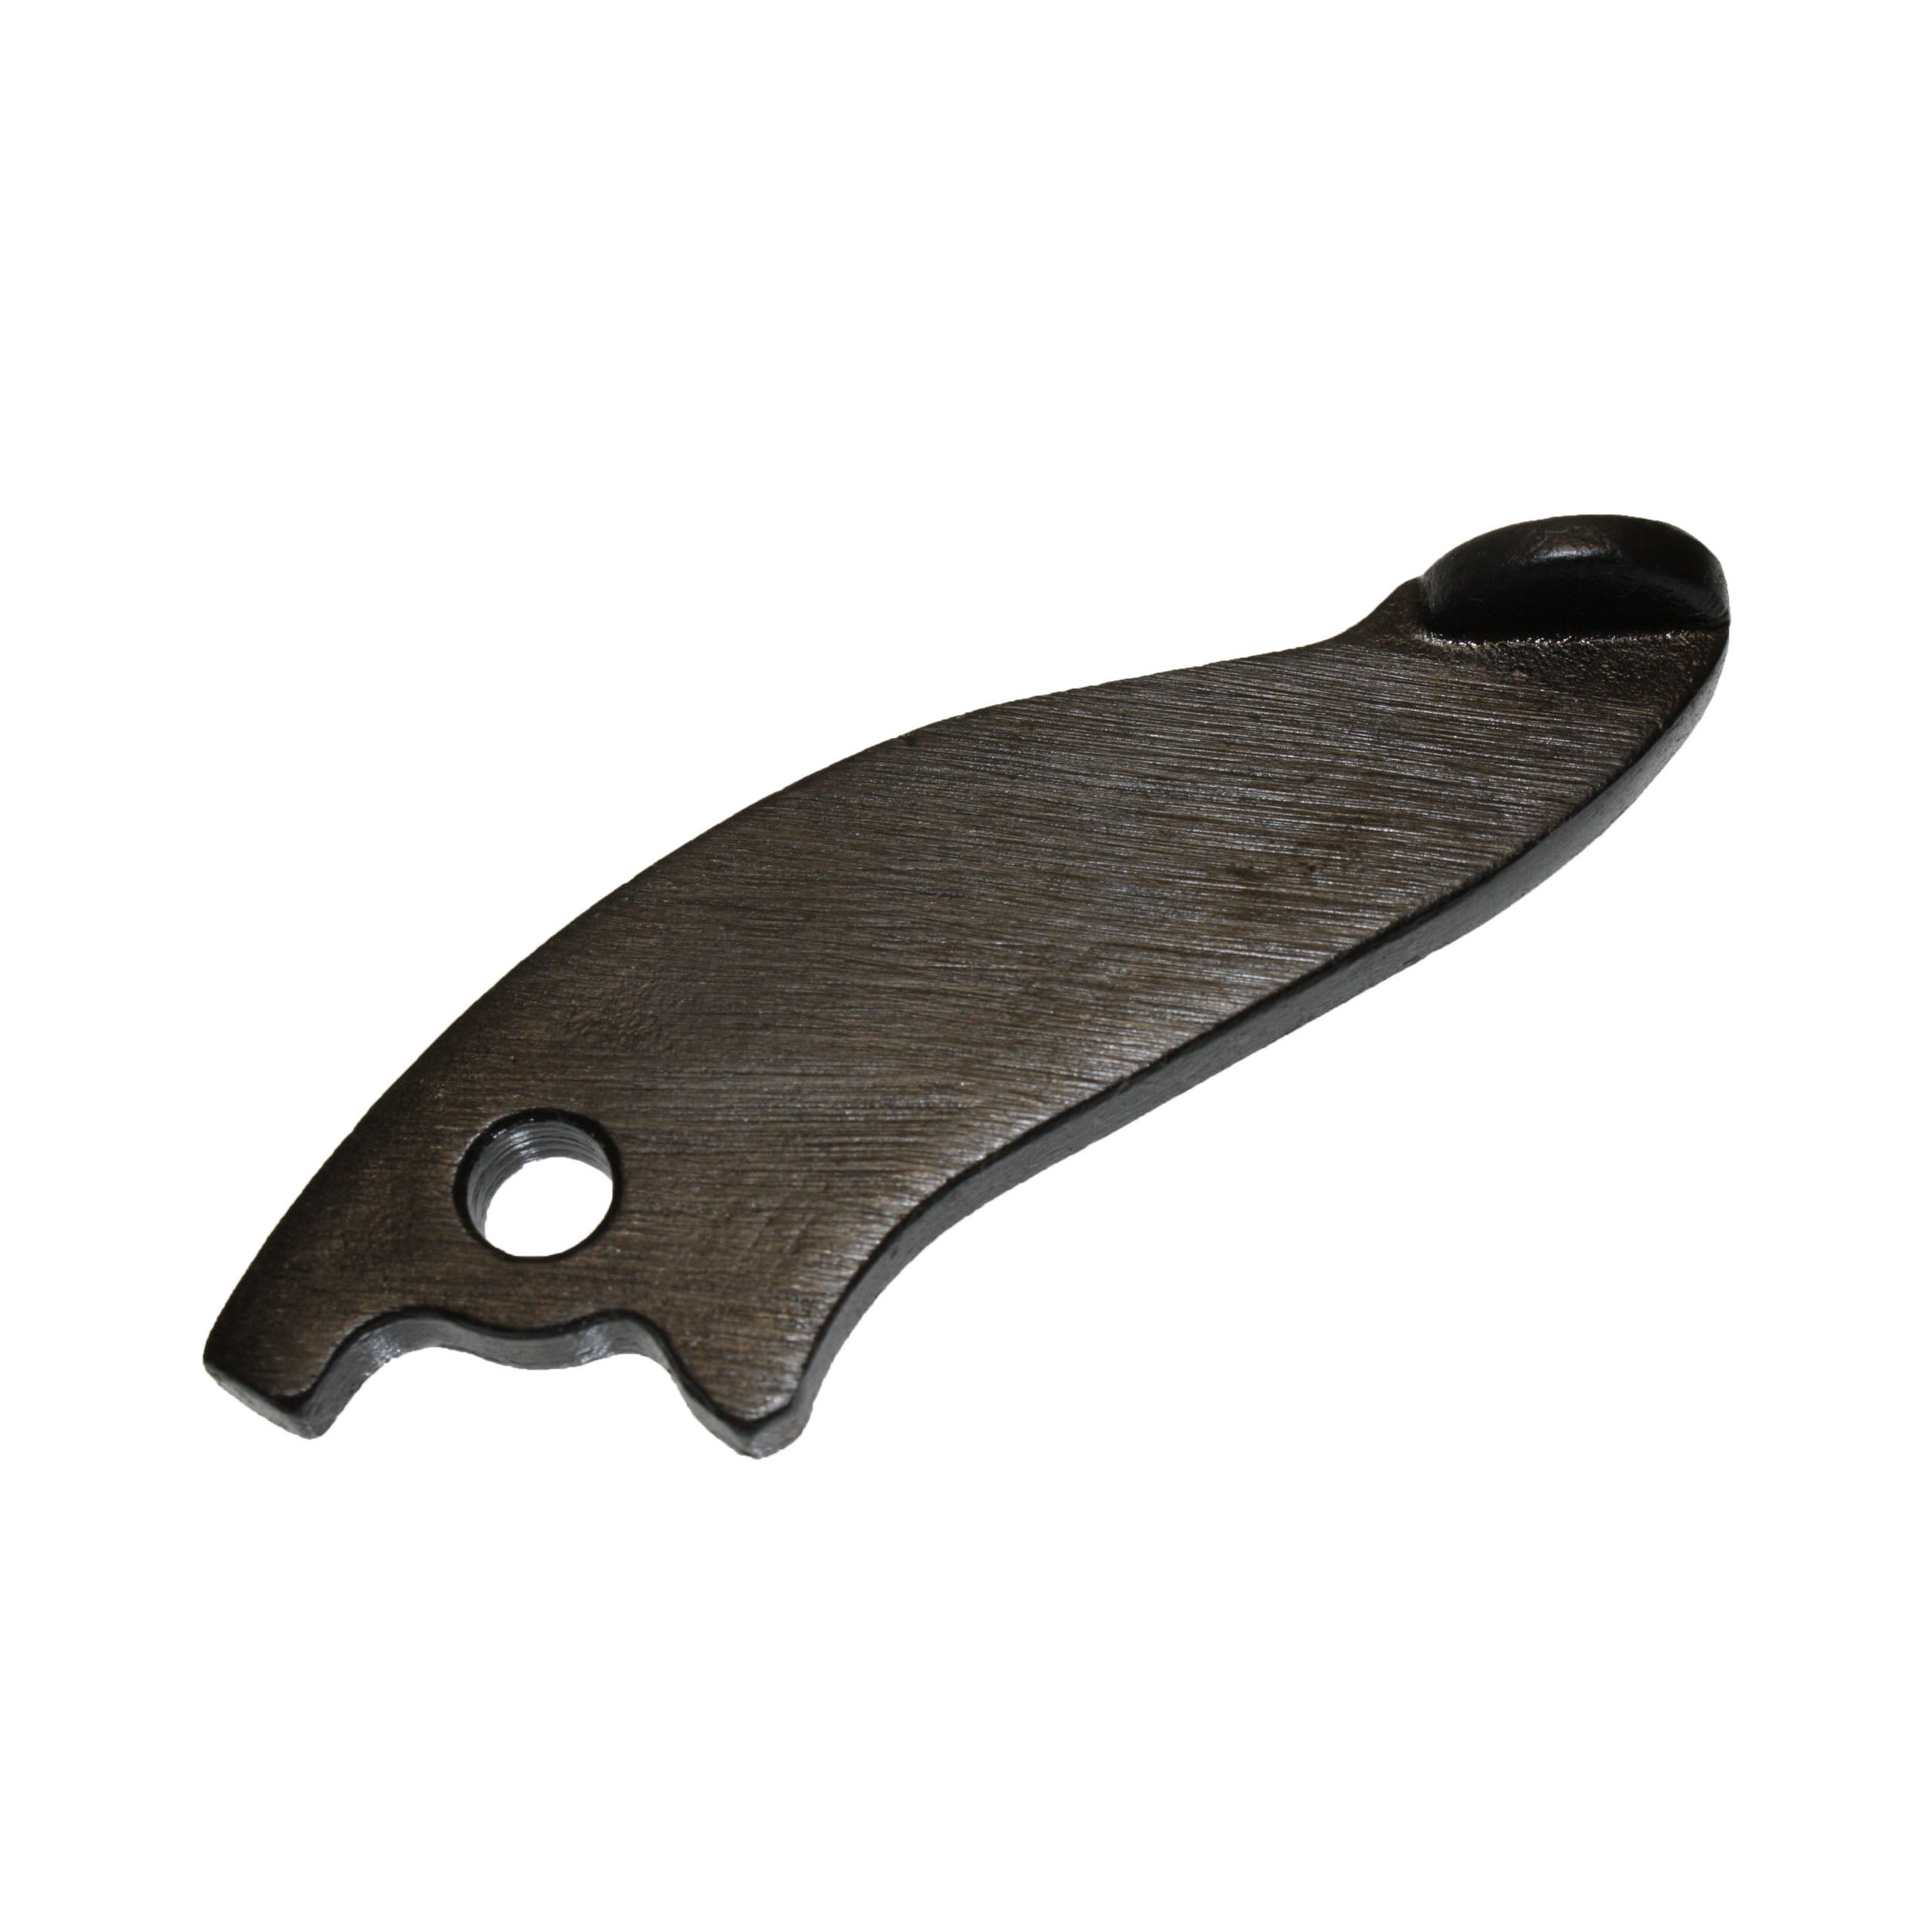 Ingersoll Rand Lever Chipping Hammer